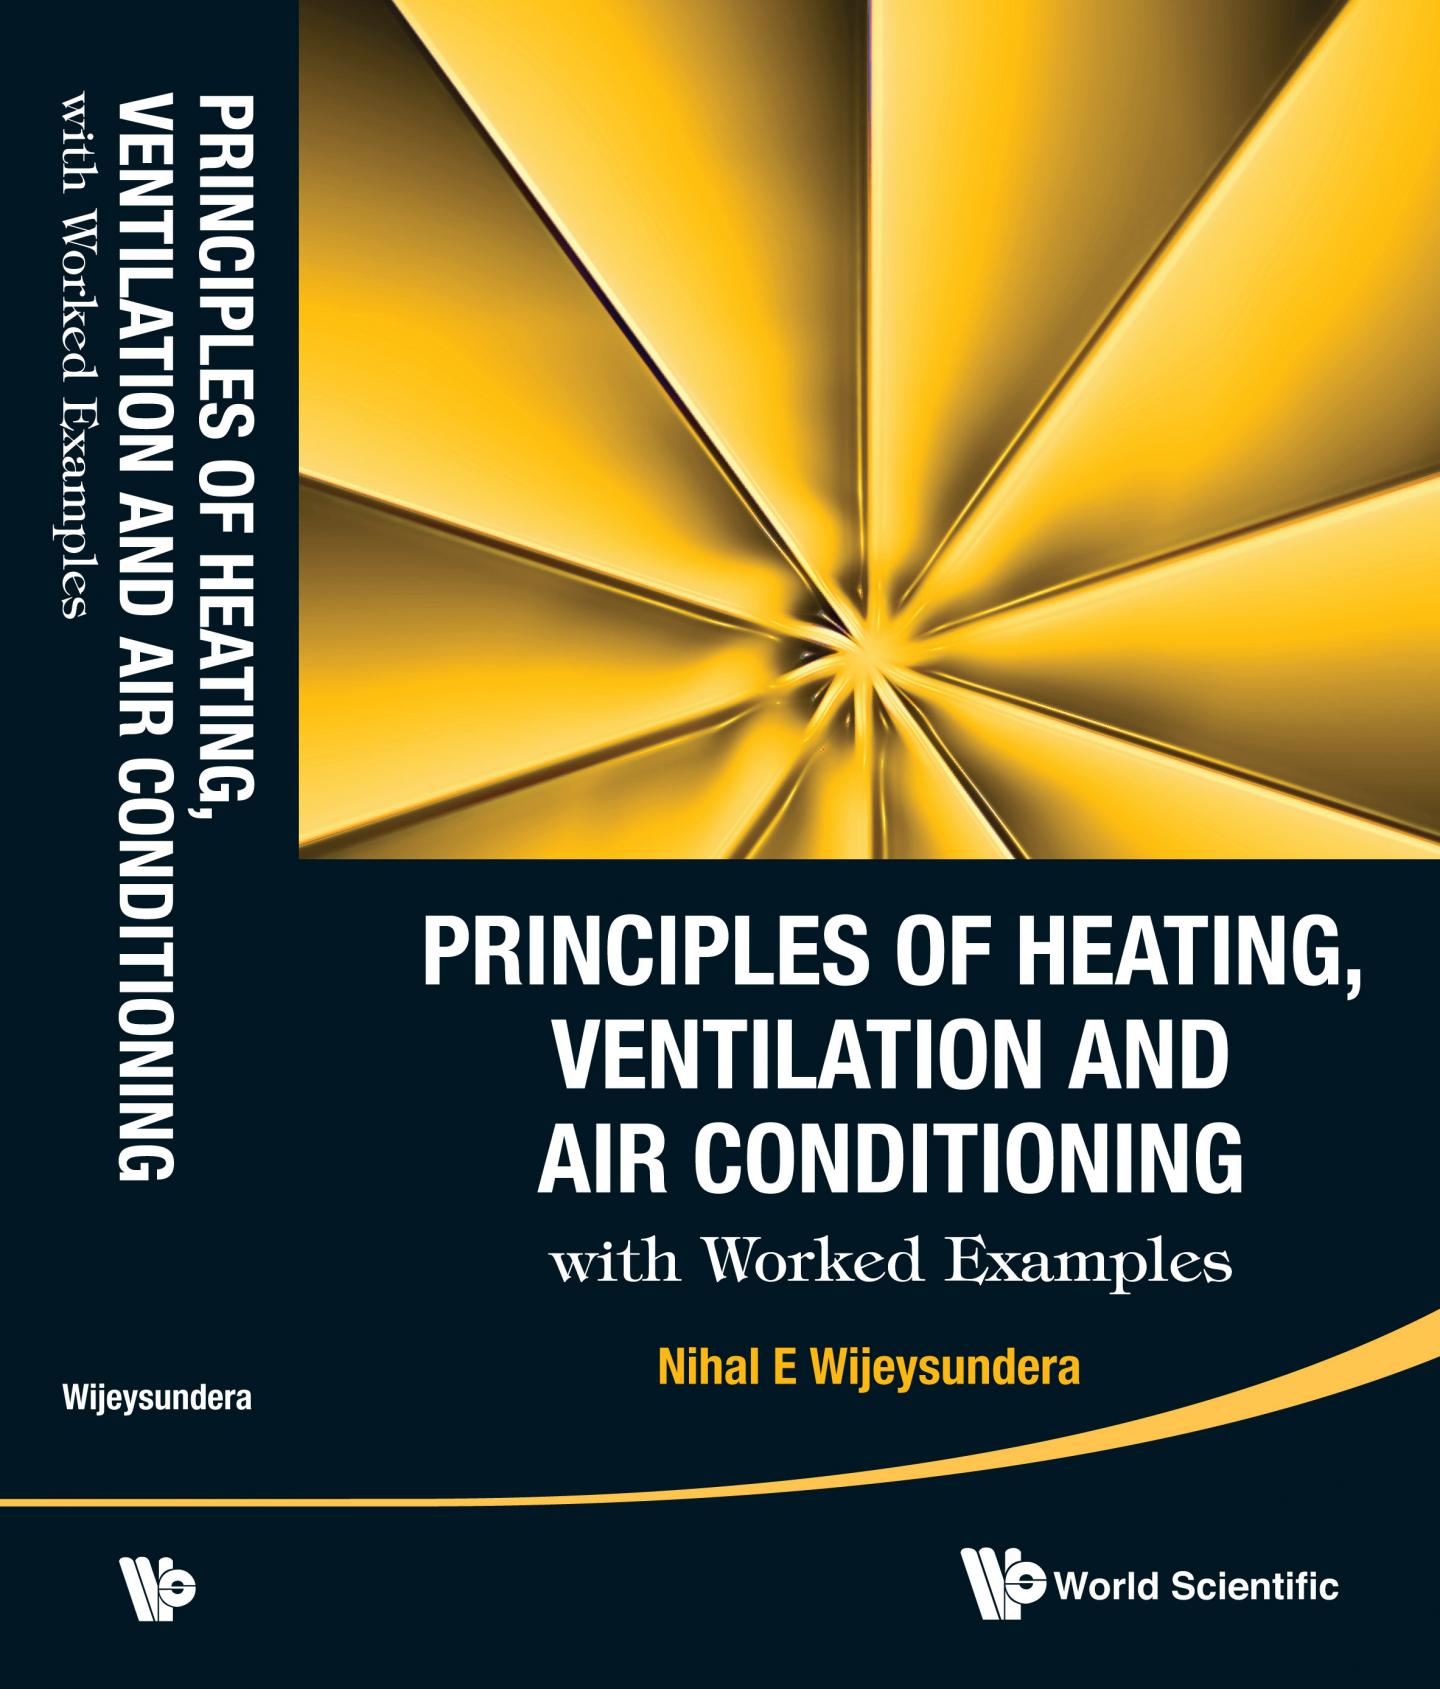 Principles of Heating, Ventilation and Air Conditioning